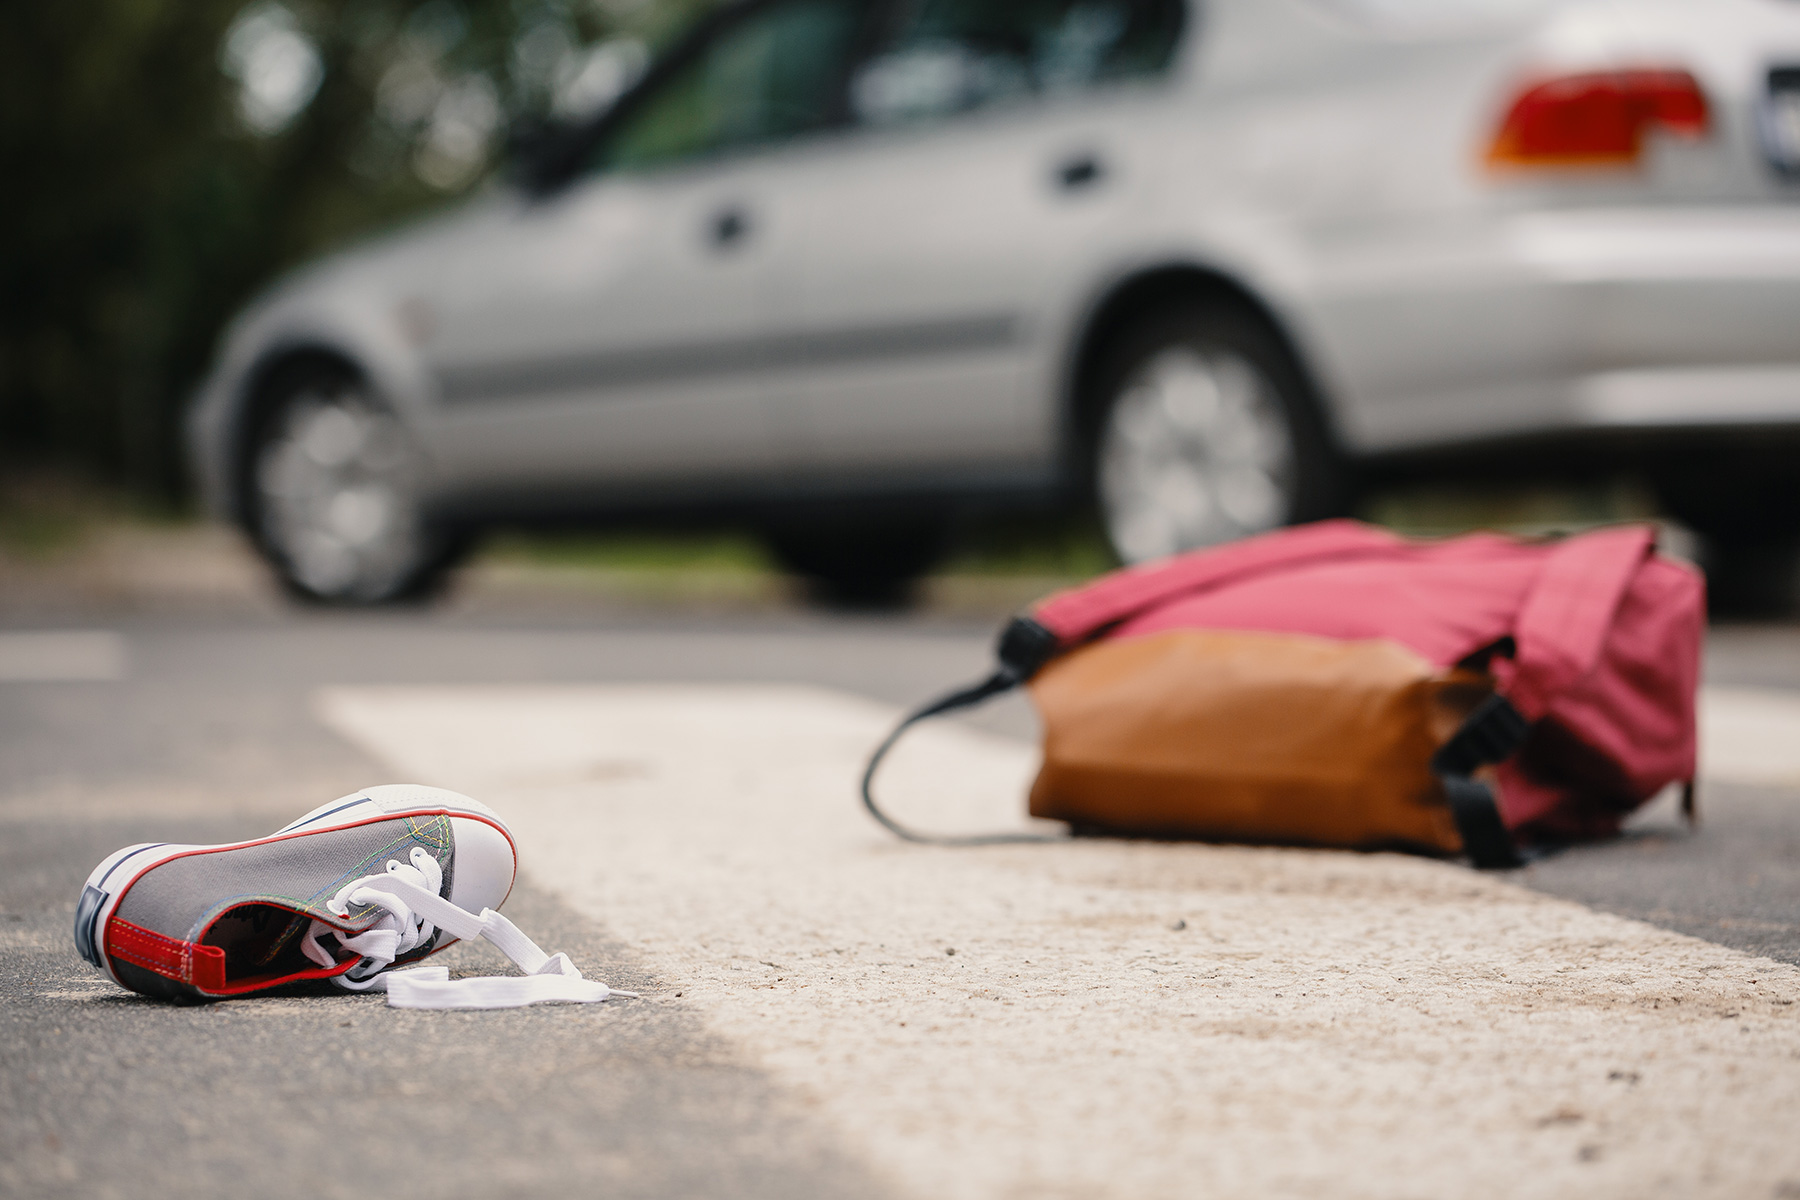 A child's backpack and shoe remain in the street after a car accident